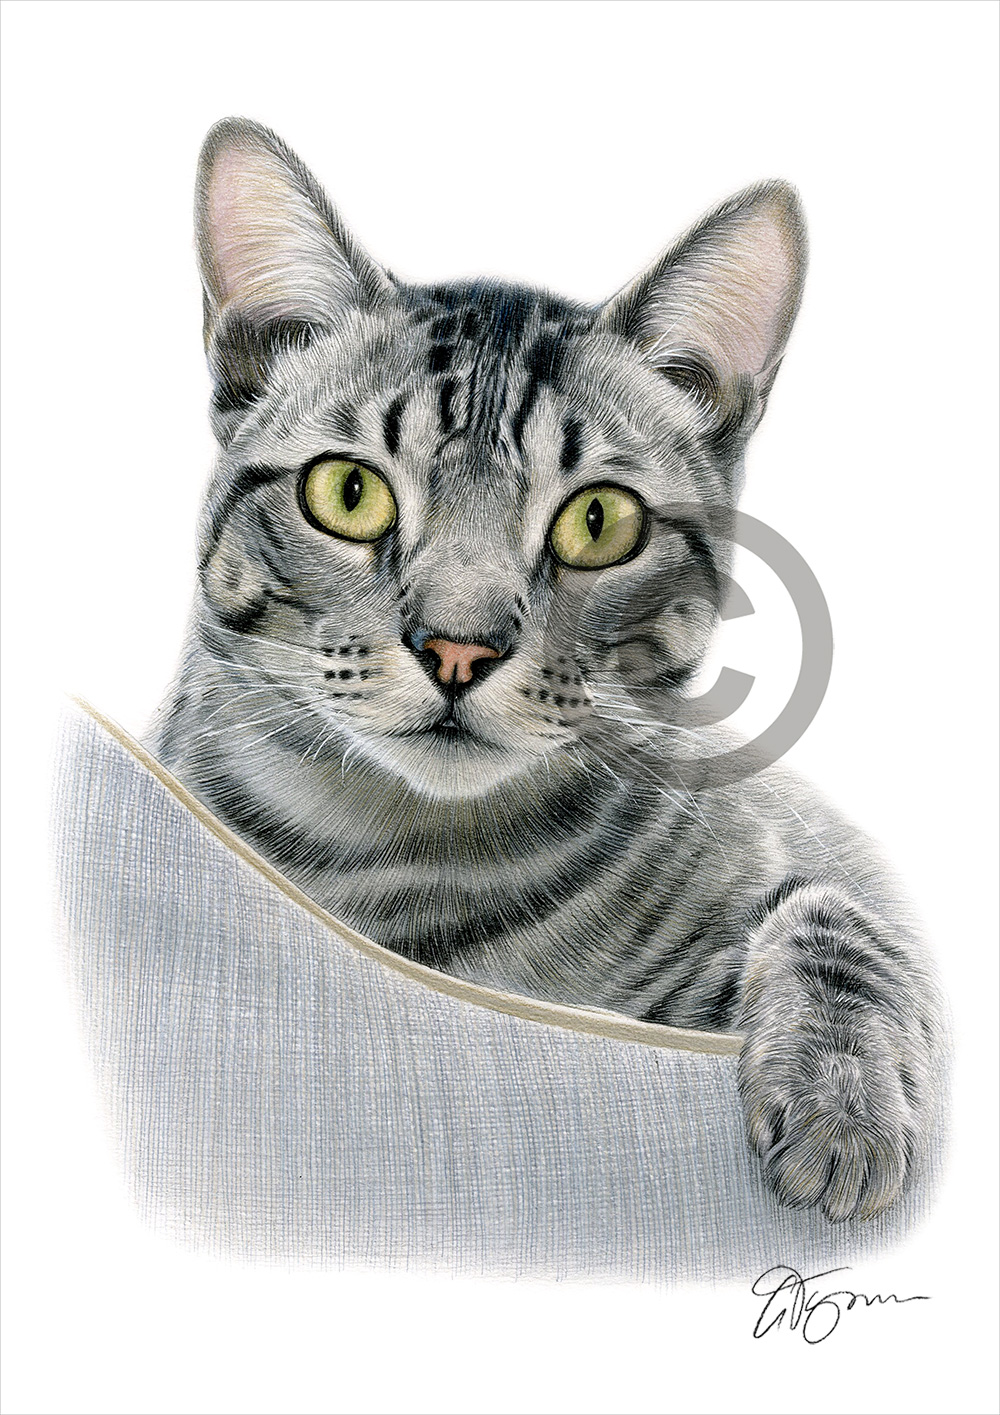 Colour pencil drawing of a cat in its basket by artist Gary Tymon